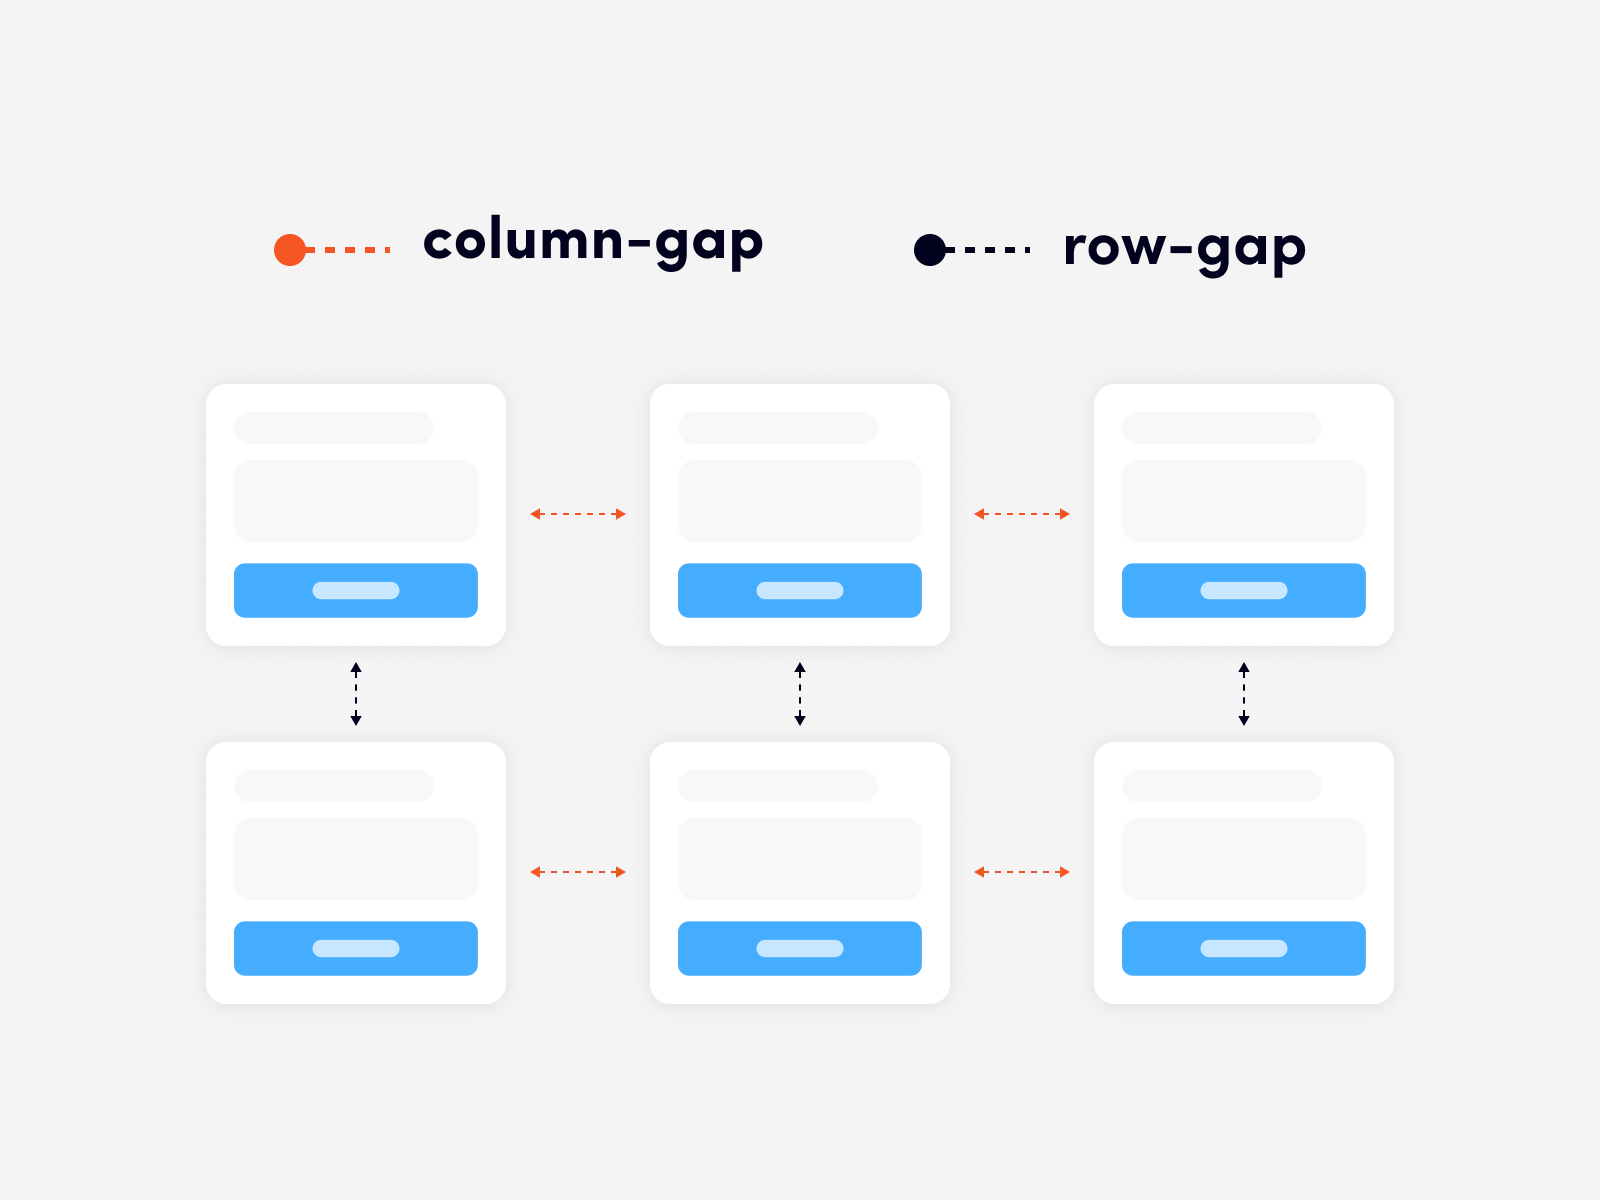 We use the row-gap property to set the distance between rows, and the column-gap property sets the distance between columns